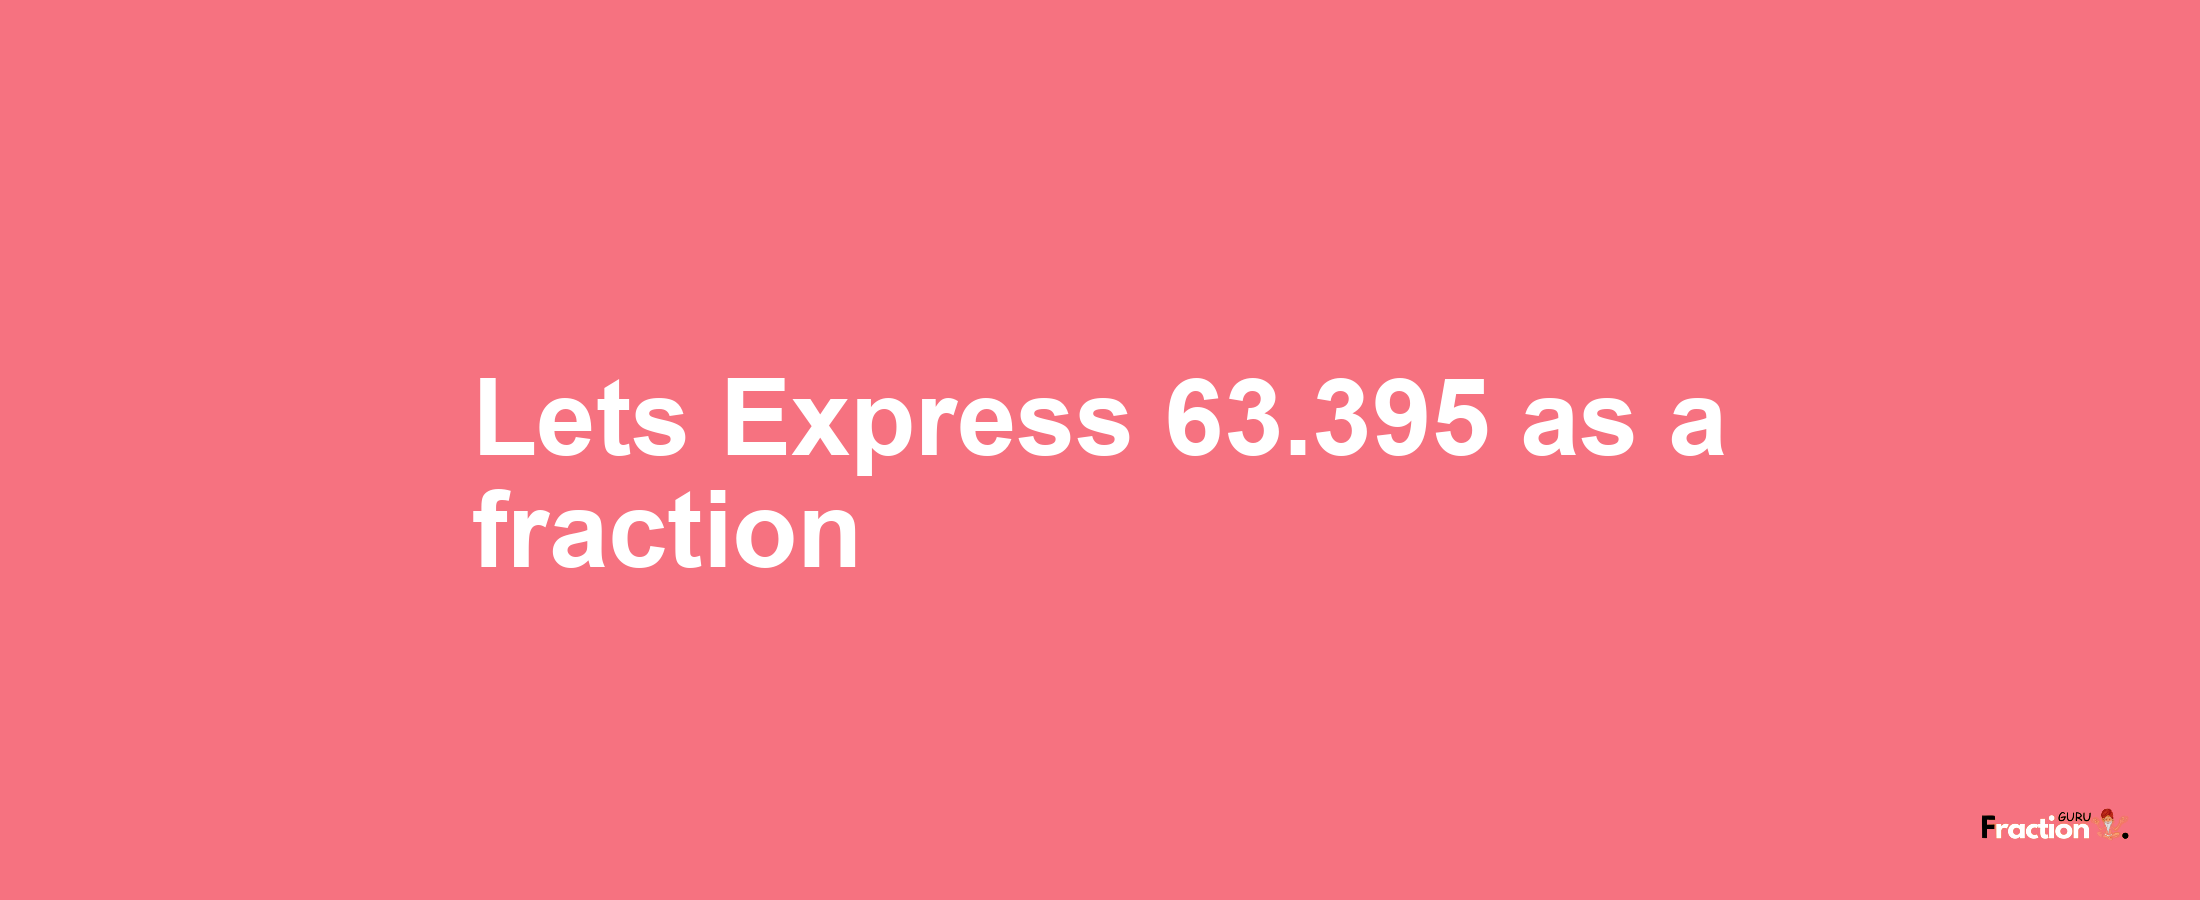 Lets Express 63.395 as afraction